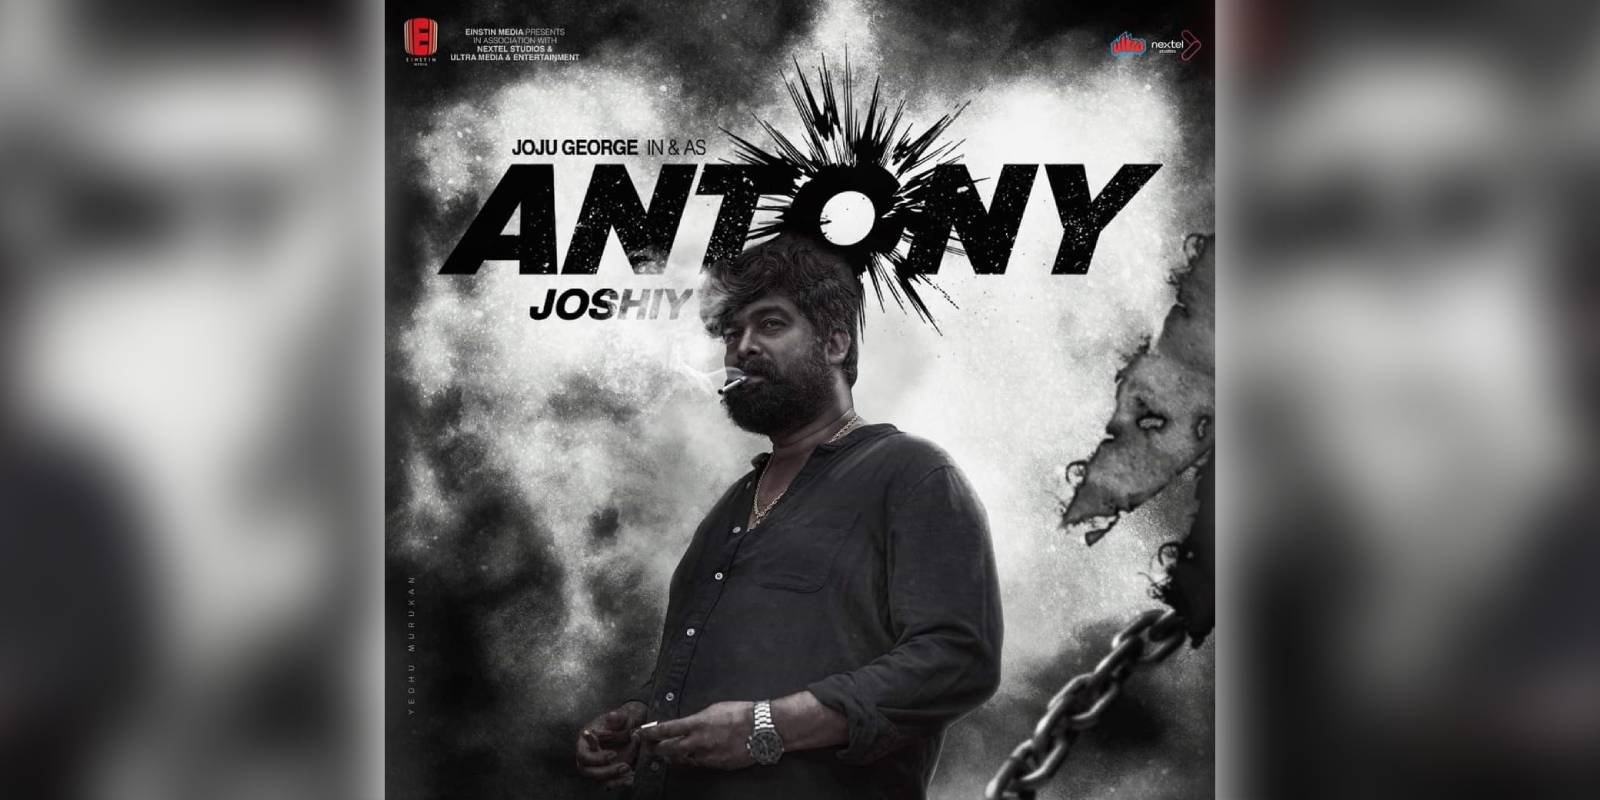 A poster of the film Antony